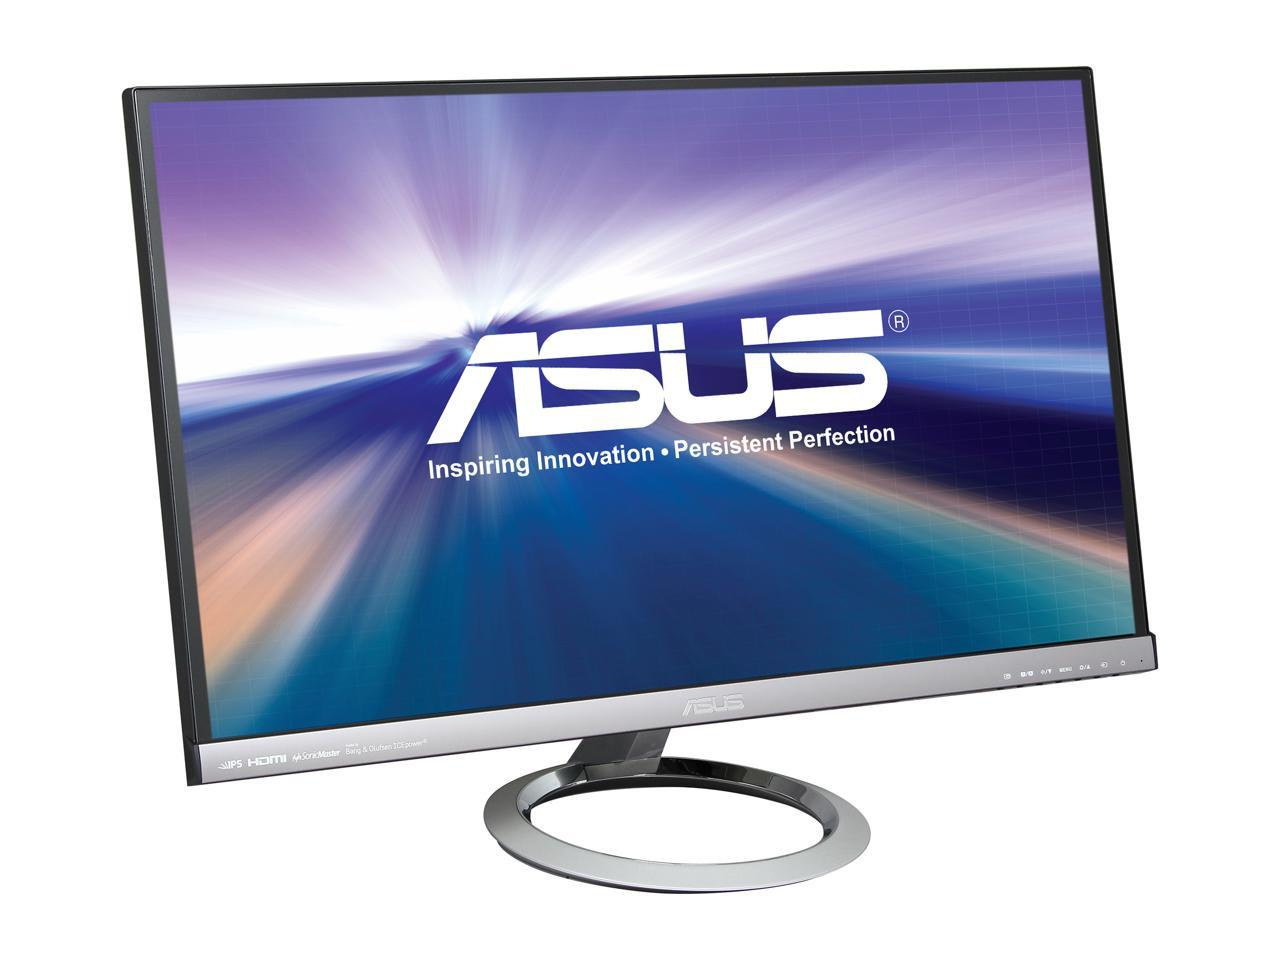 ASUS Designo MX279H Silver & Black 27" Frameless Widescreen Monitor FHD (1920x1080) AH-IPS 5ms (GTG) Built-in Audio by Bang & Olufsen ICEpower® 2 x HDMI D-Sub 3.5mm Earphone Jack 250 cd/m2 ASCR 80,000,000:1